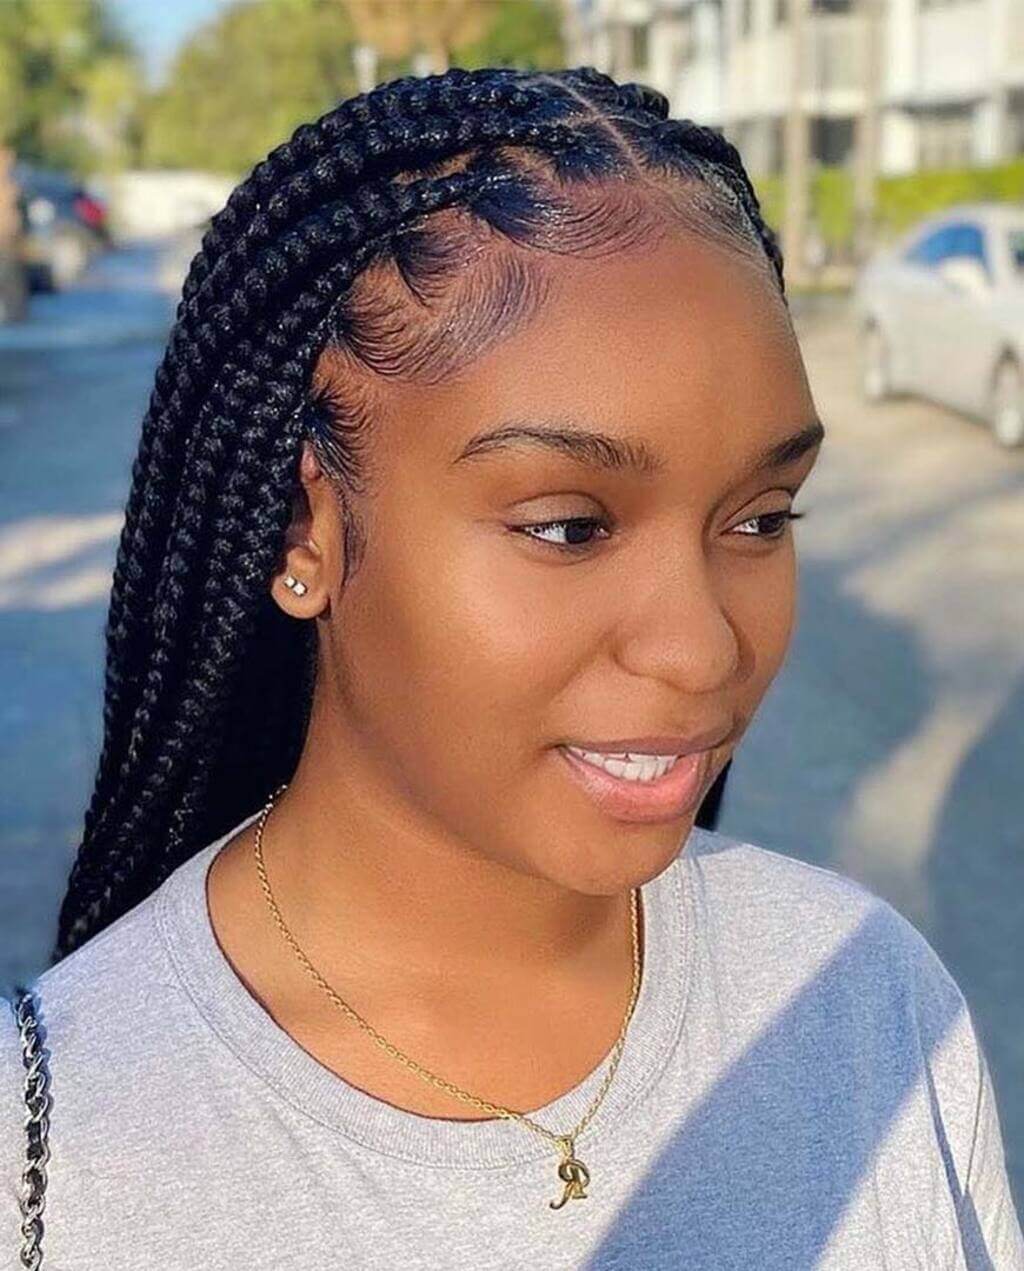 Top 11 Medium Box Braids Hairstyle To Try in 2023!